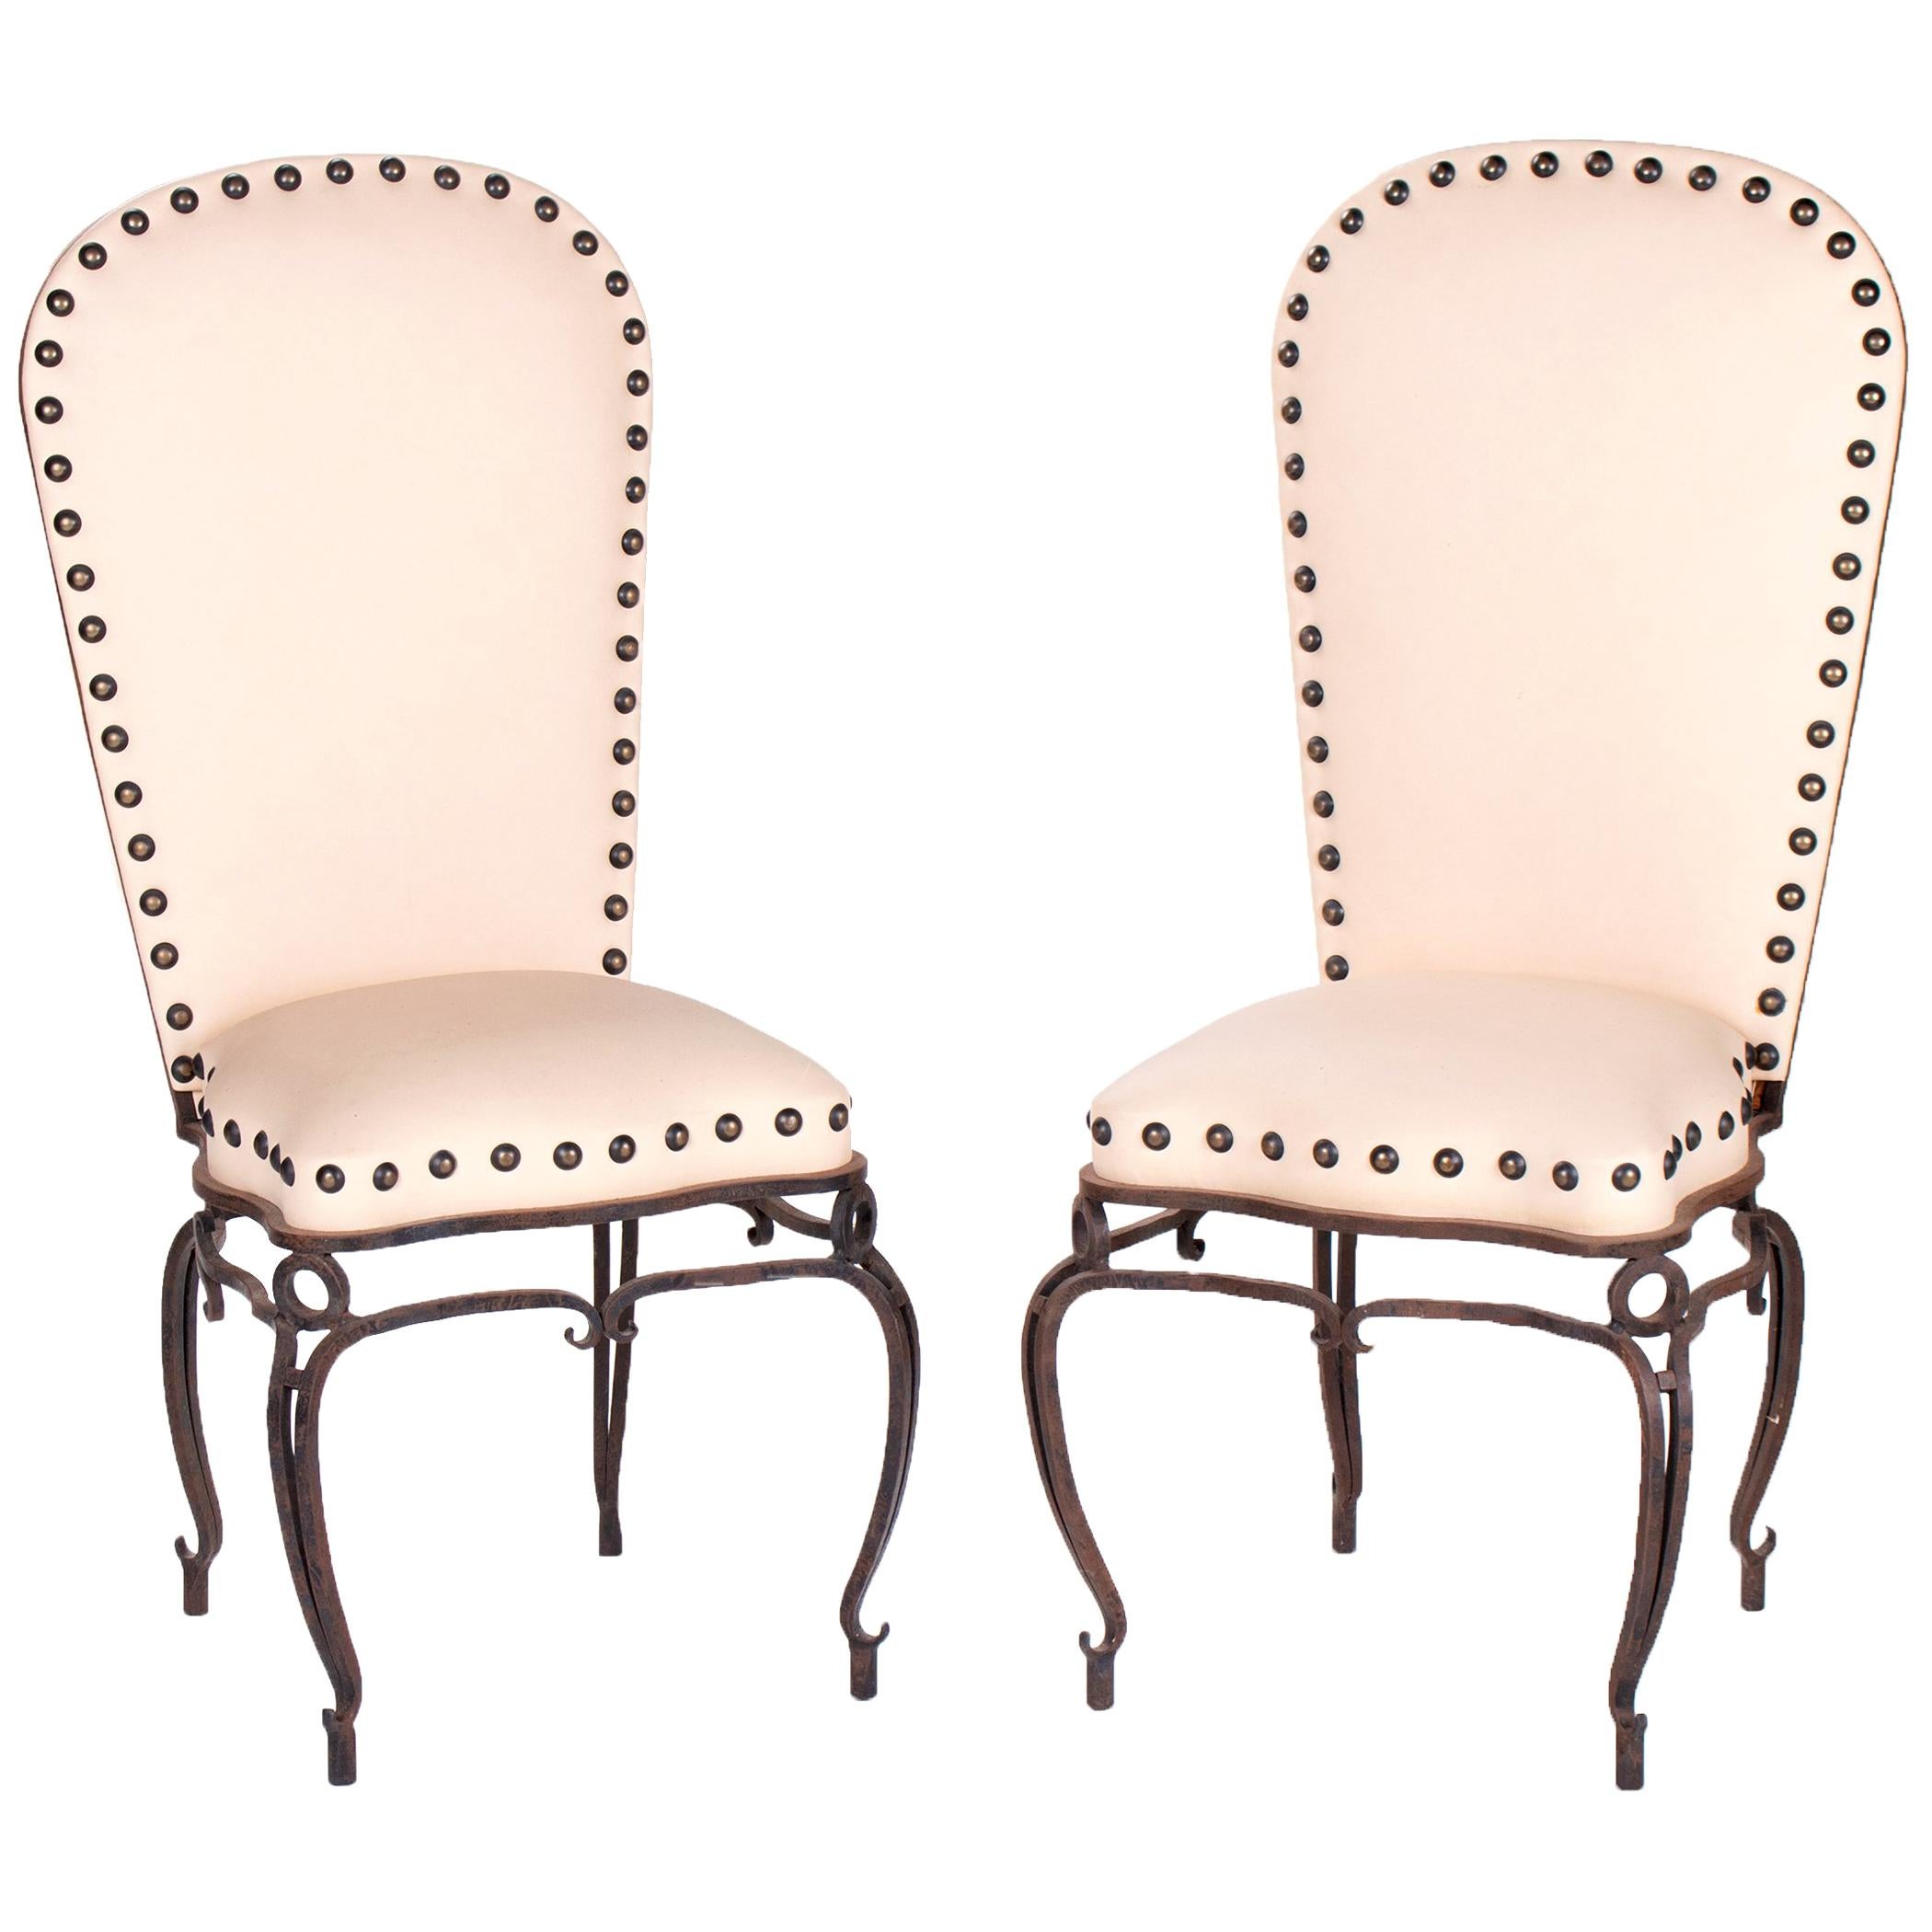 1970s Pair of French Wrought Iron White Upholstered Chairs